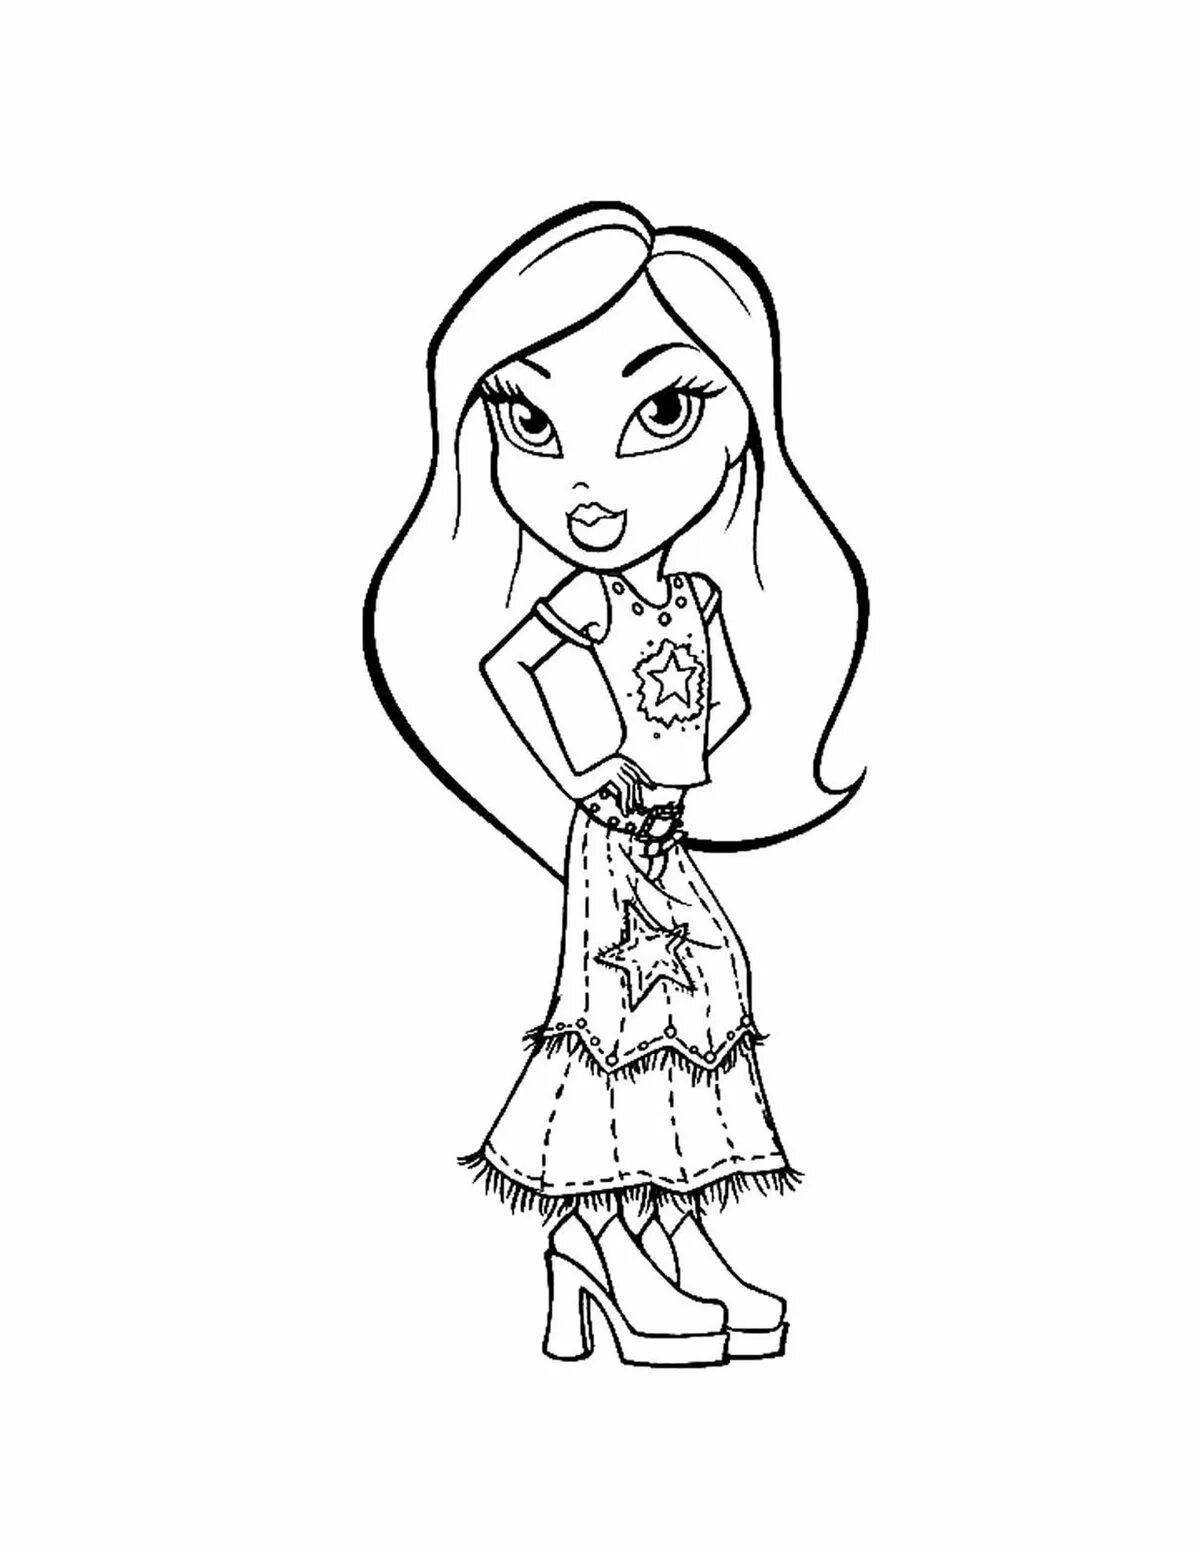 Coloring pages easy for girls